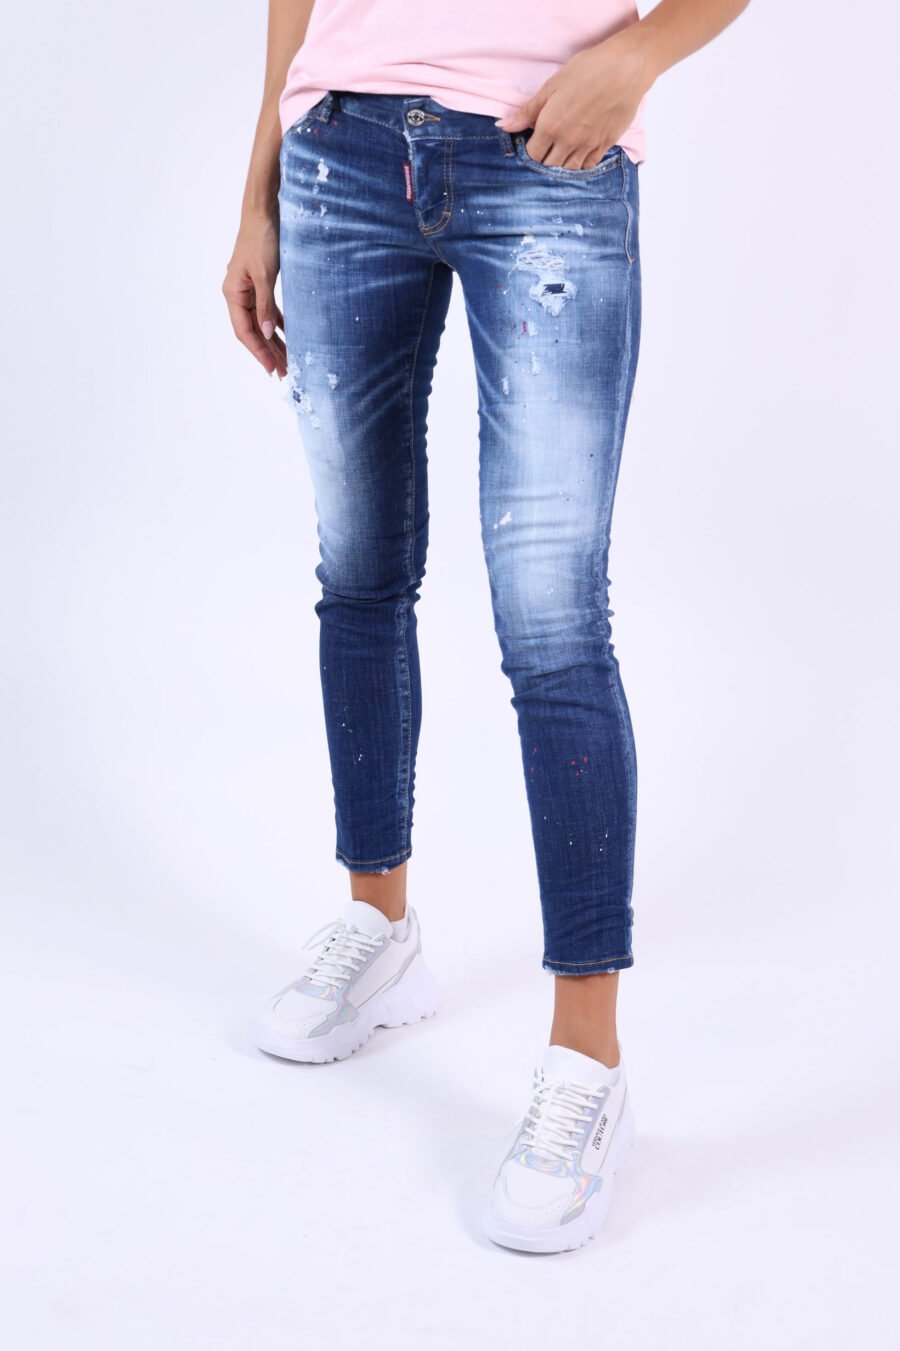 Jeans "Jennifer Jean" blue with splash paint and faded effect - 361223054662201901